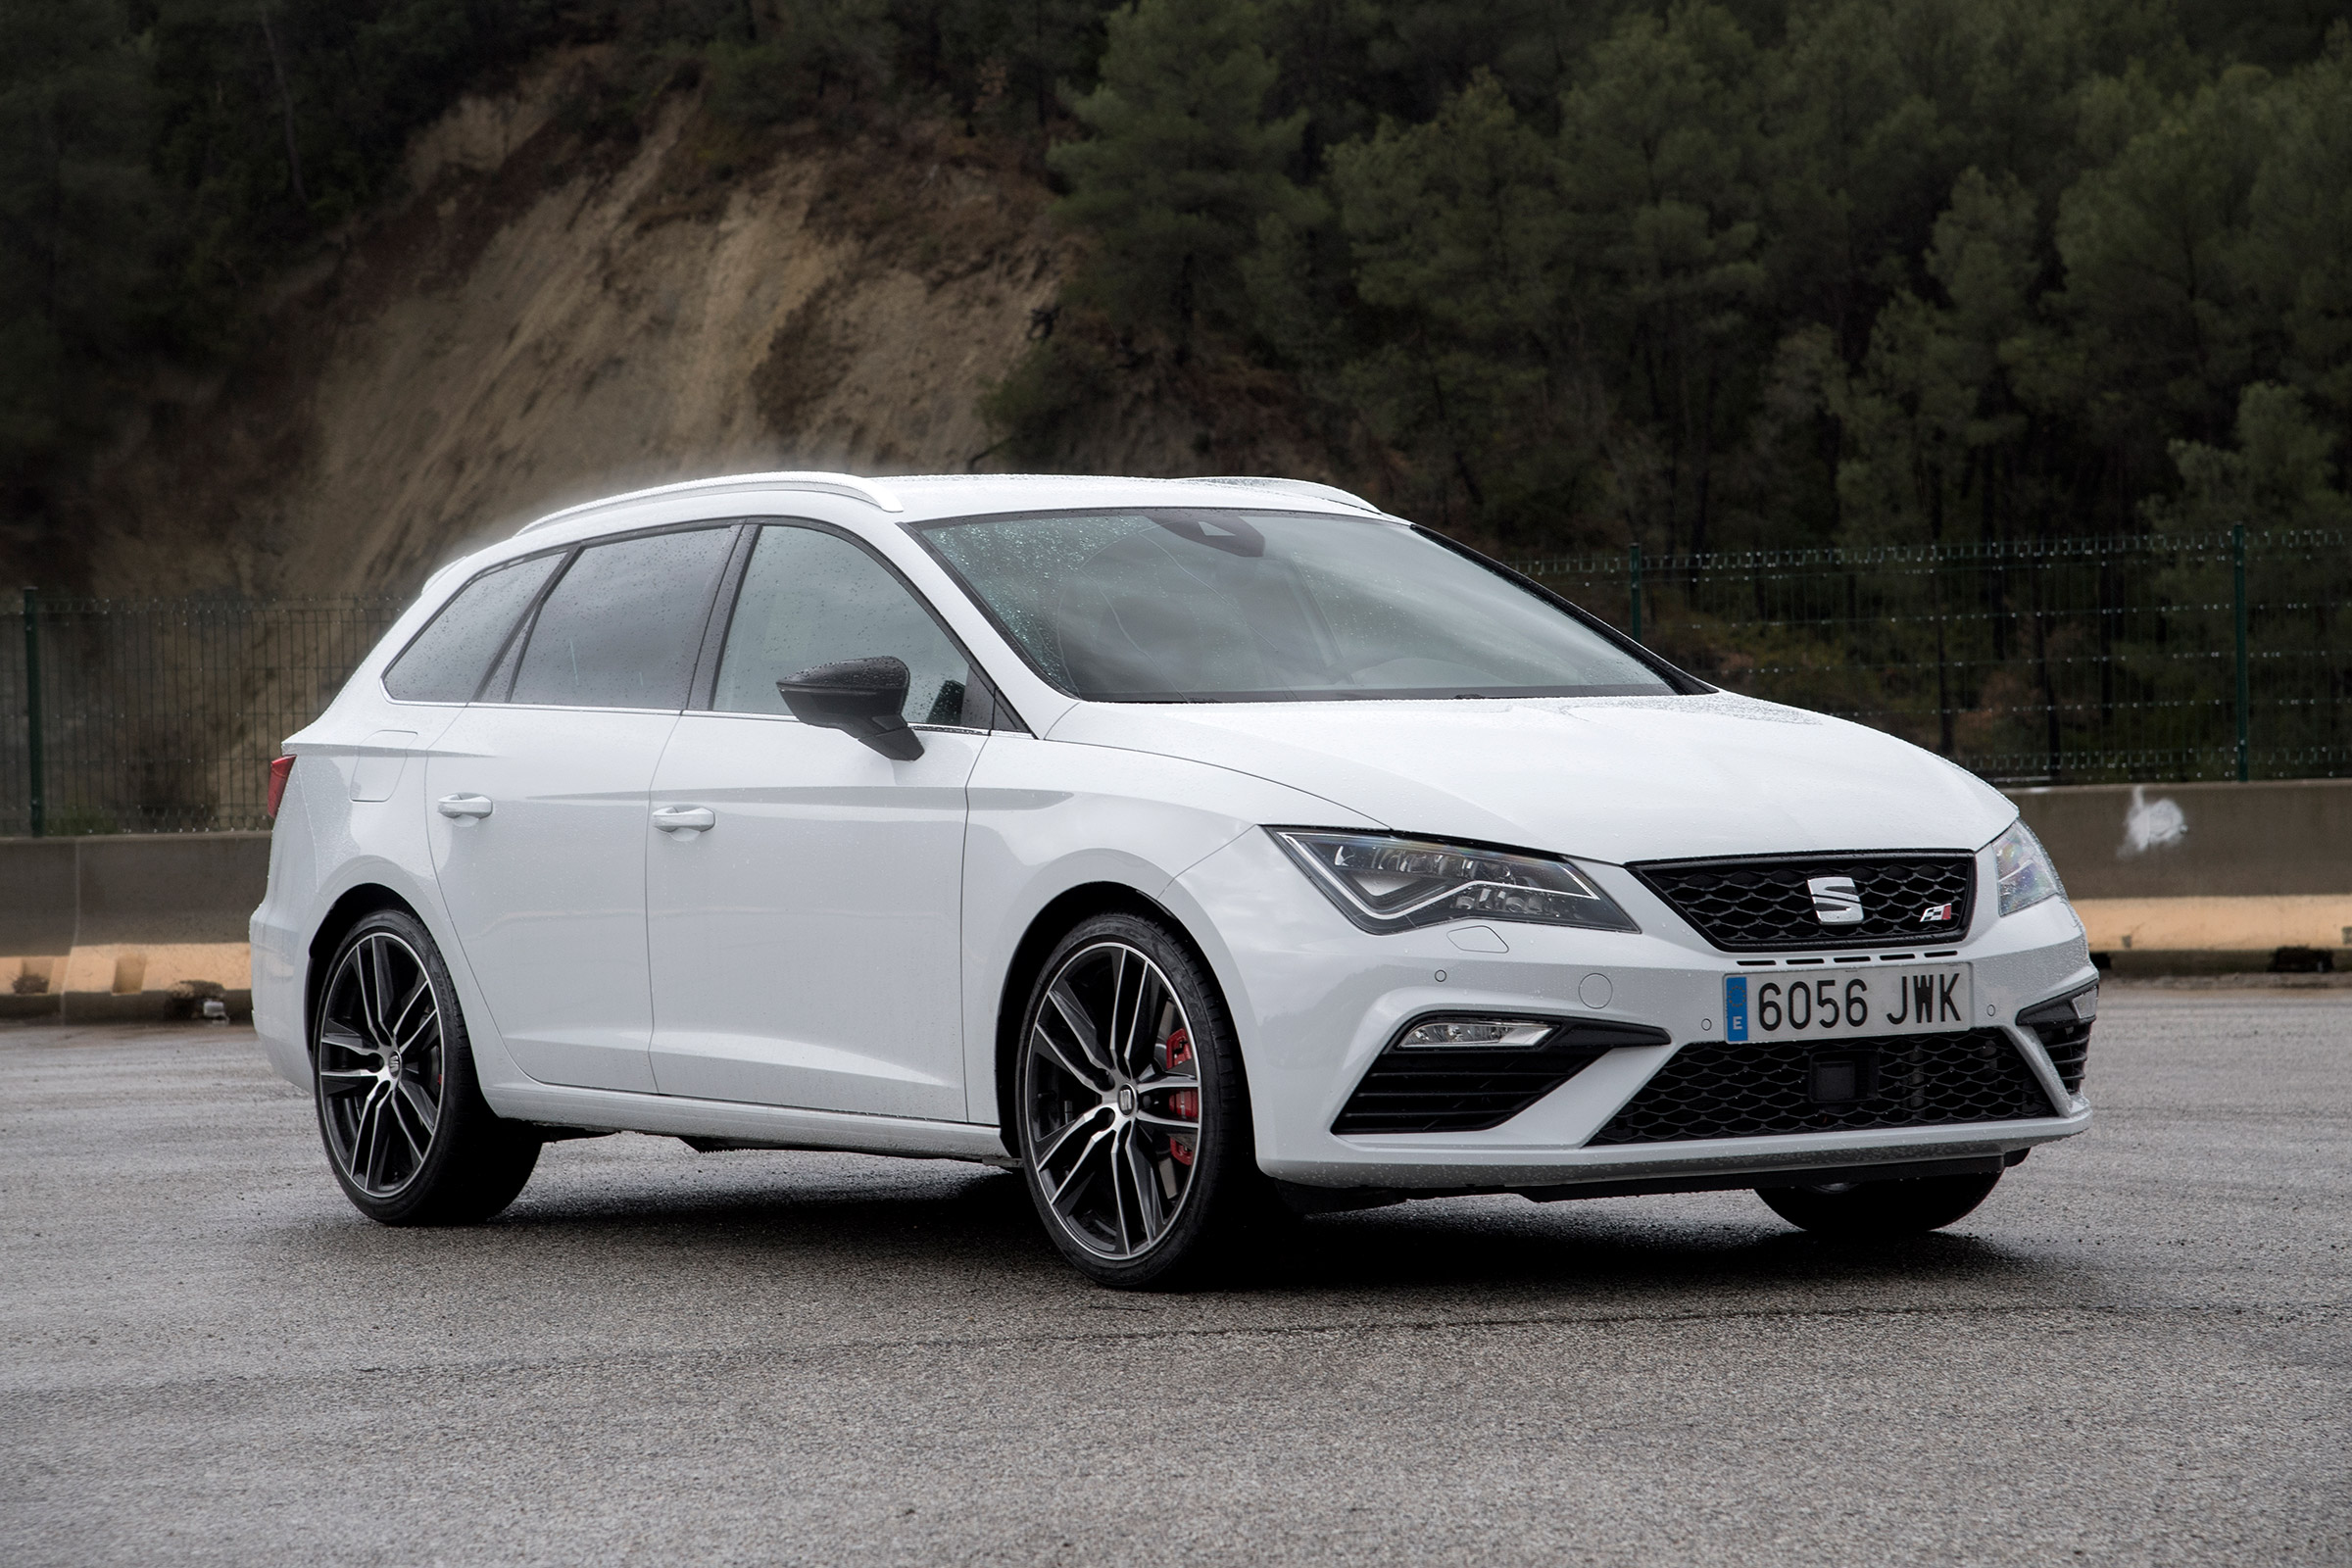 Seat Leon St Cupra 300 4drive Review Hot Estate Offers Big Boot And Four Wheel Drive Evo